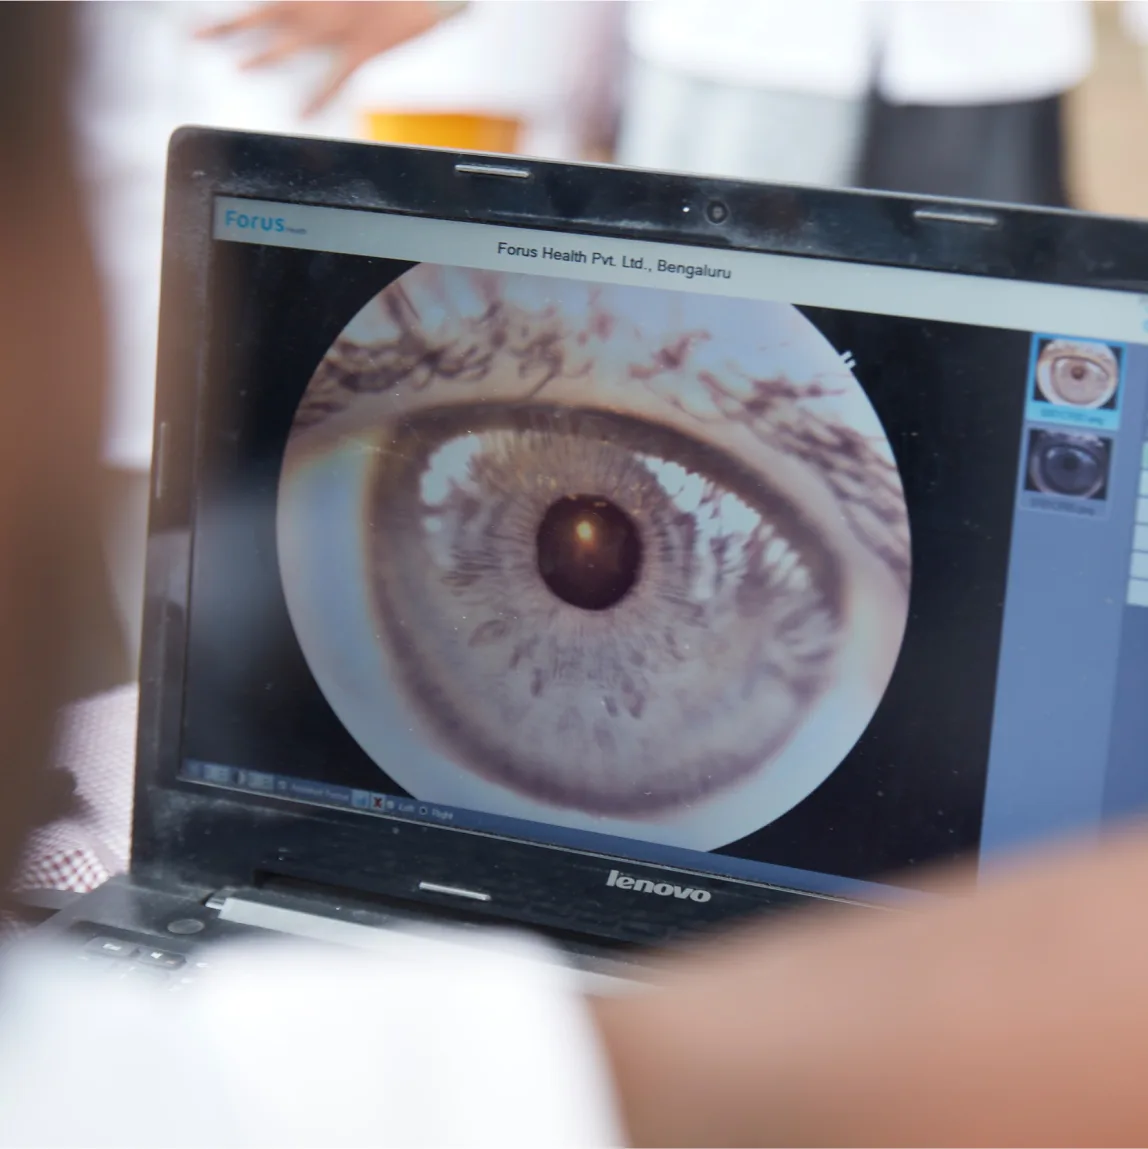 An image of a person's eye on a laptop screen.